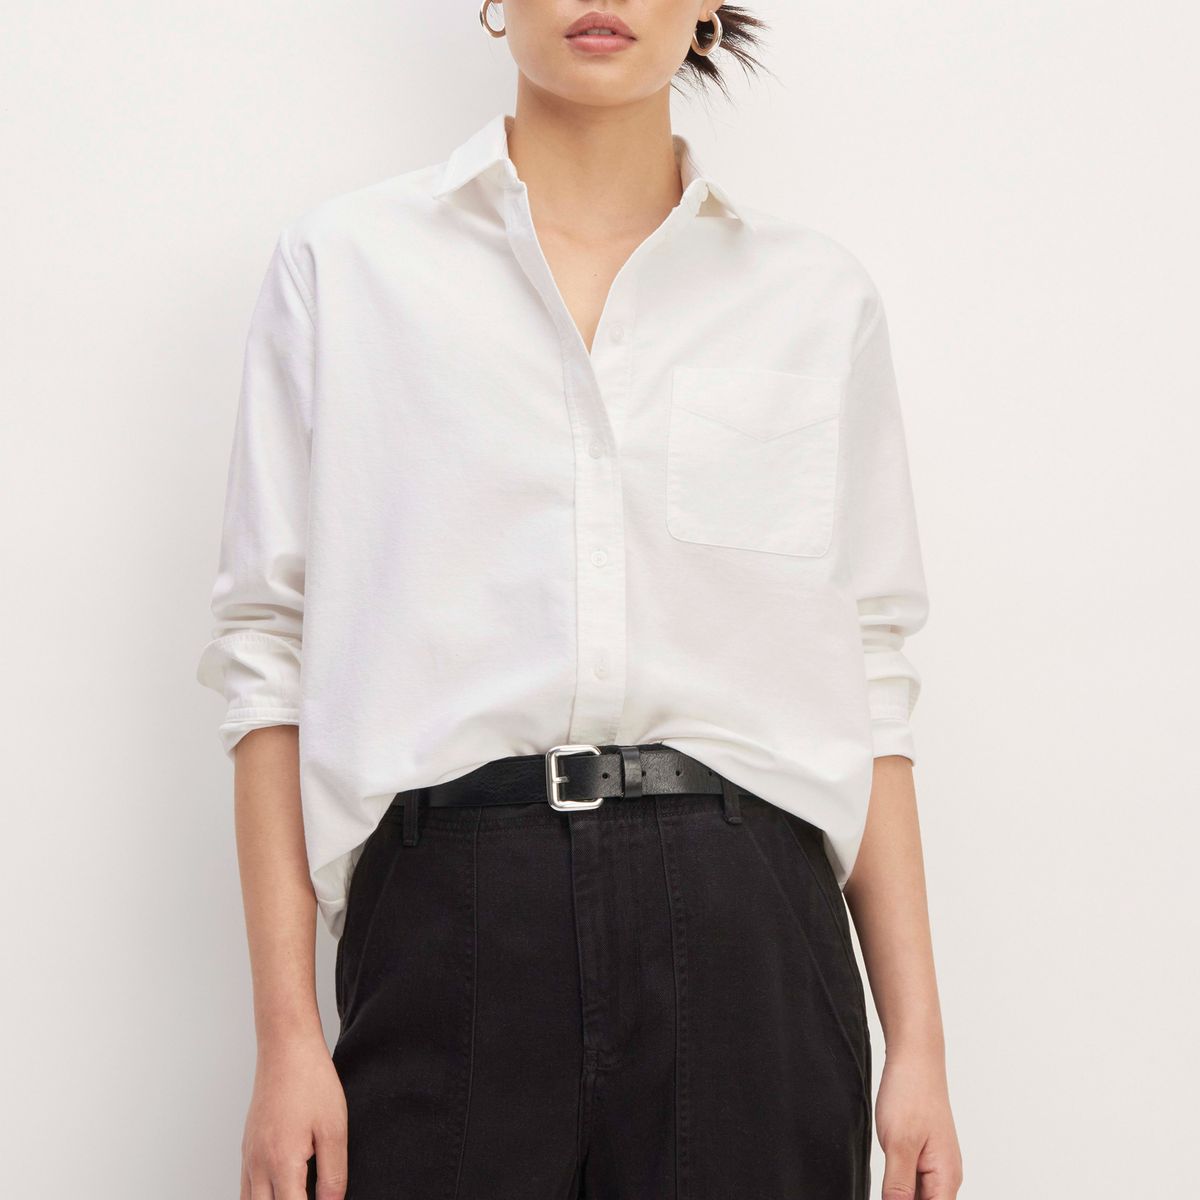 Everlane the Relaxed Oxford Shirt